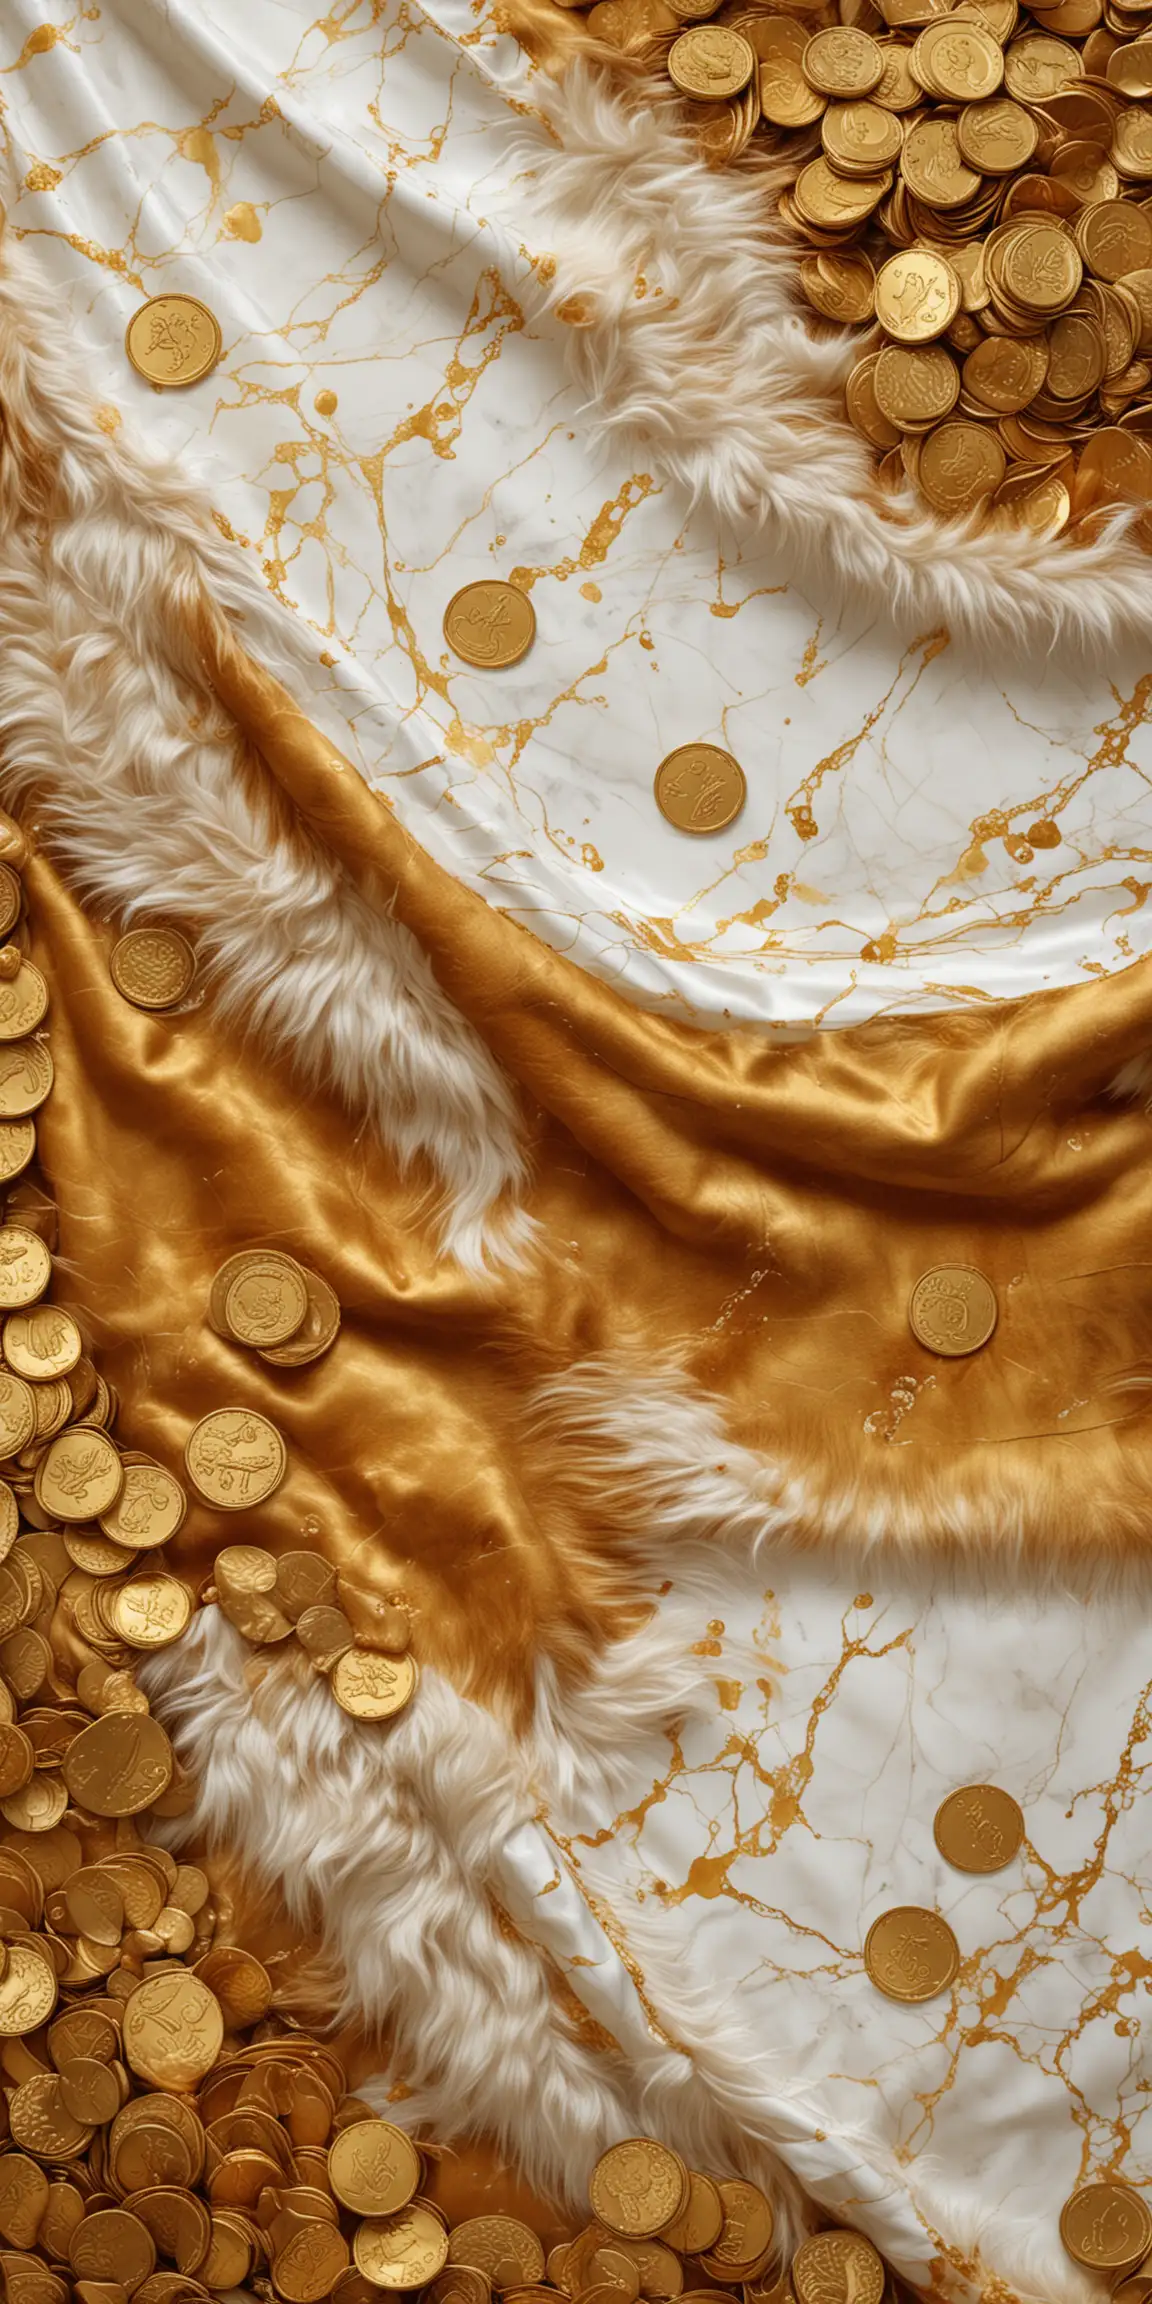 a marble flag banner. cloth made of lustering satin silk. white and gold marble. gold coins and treasure. golden honey brown fur outlining the edges. no humans. surreal. multi-depths. very intricately and microscopically detailed.